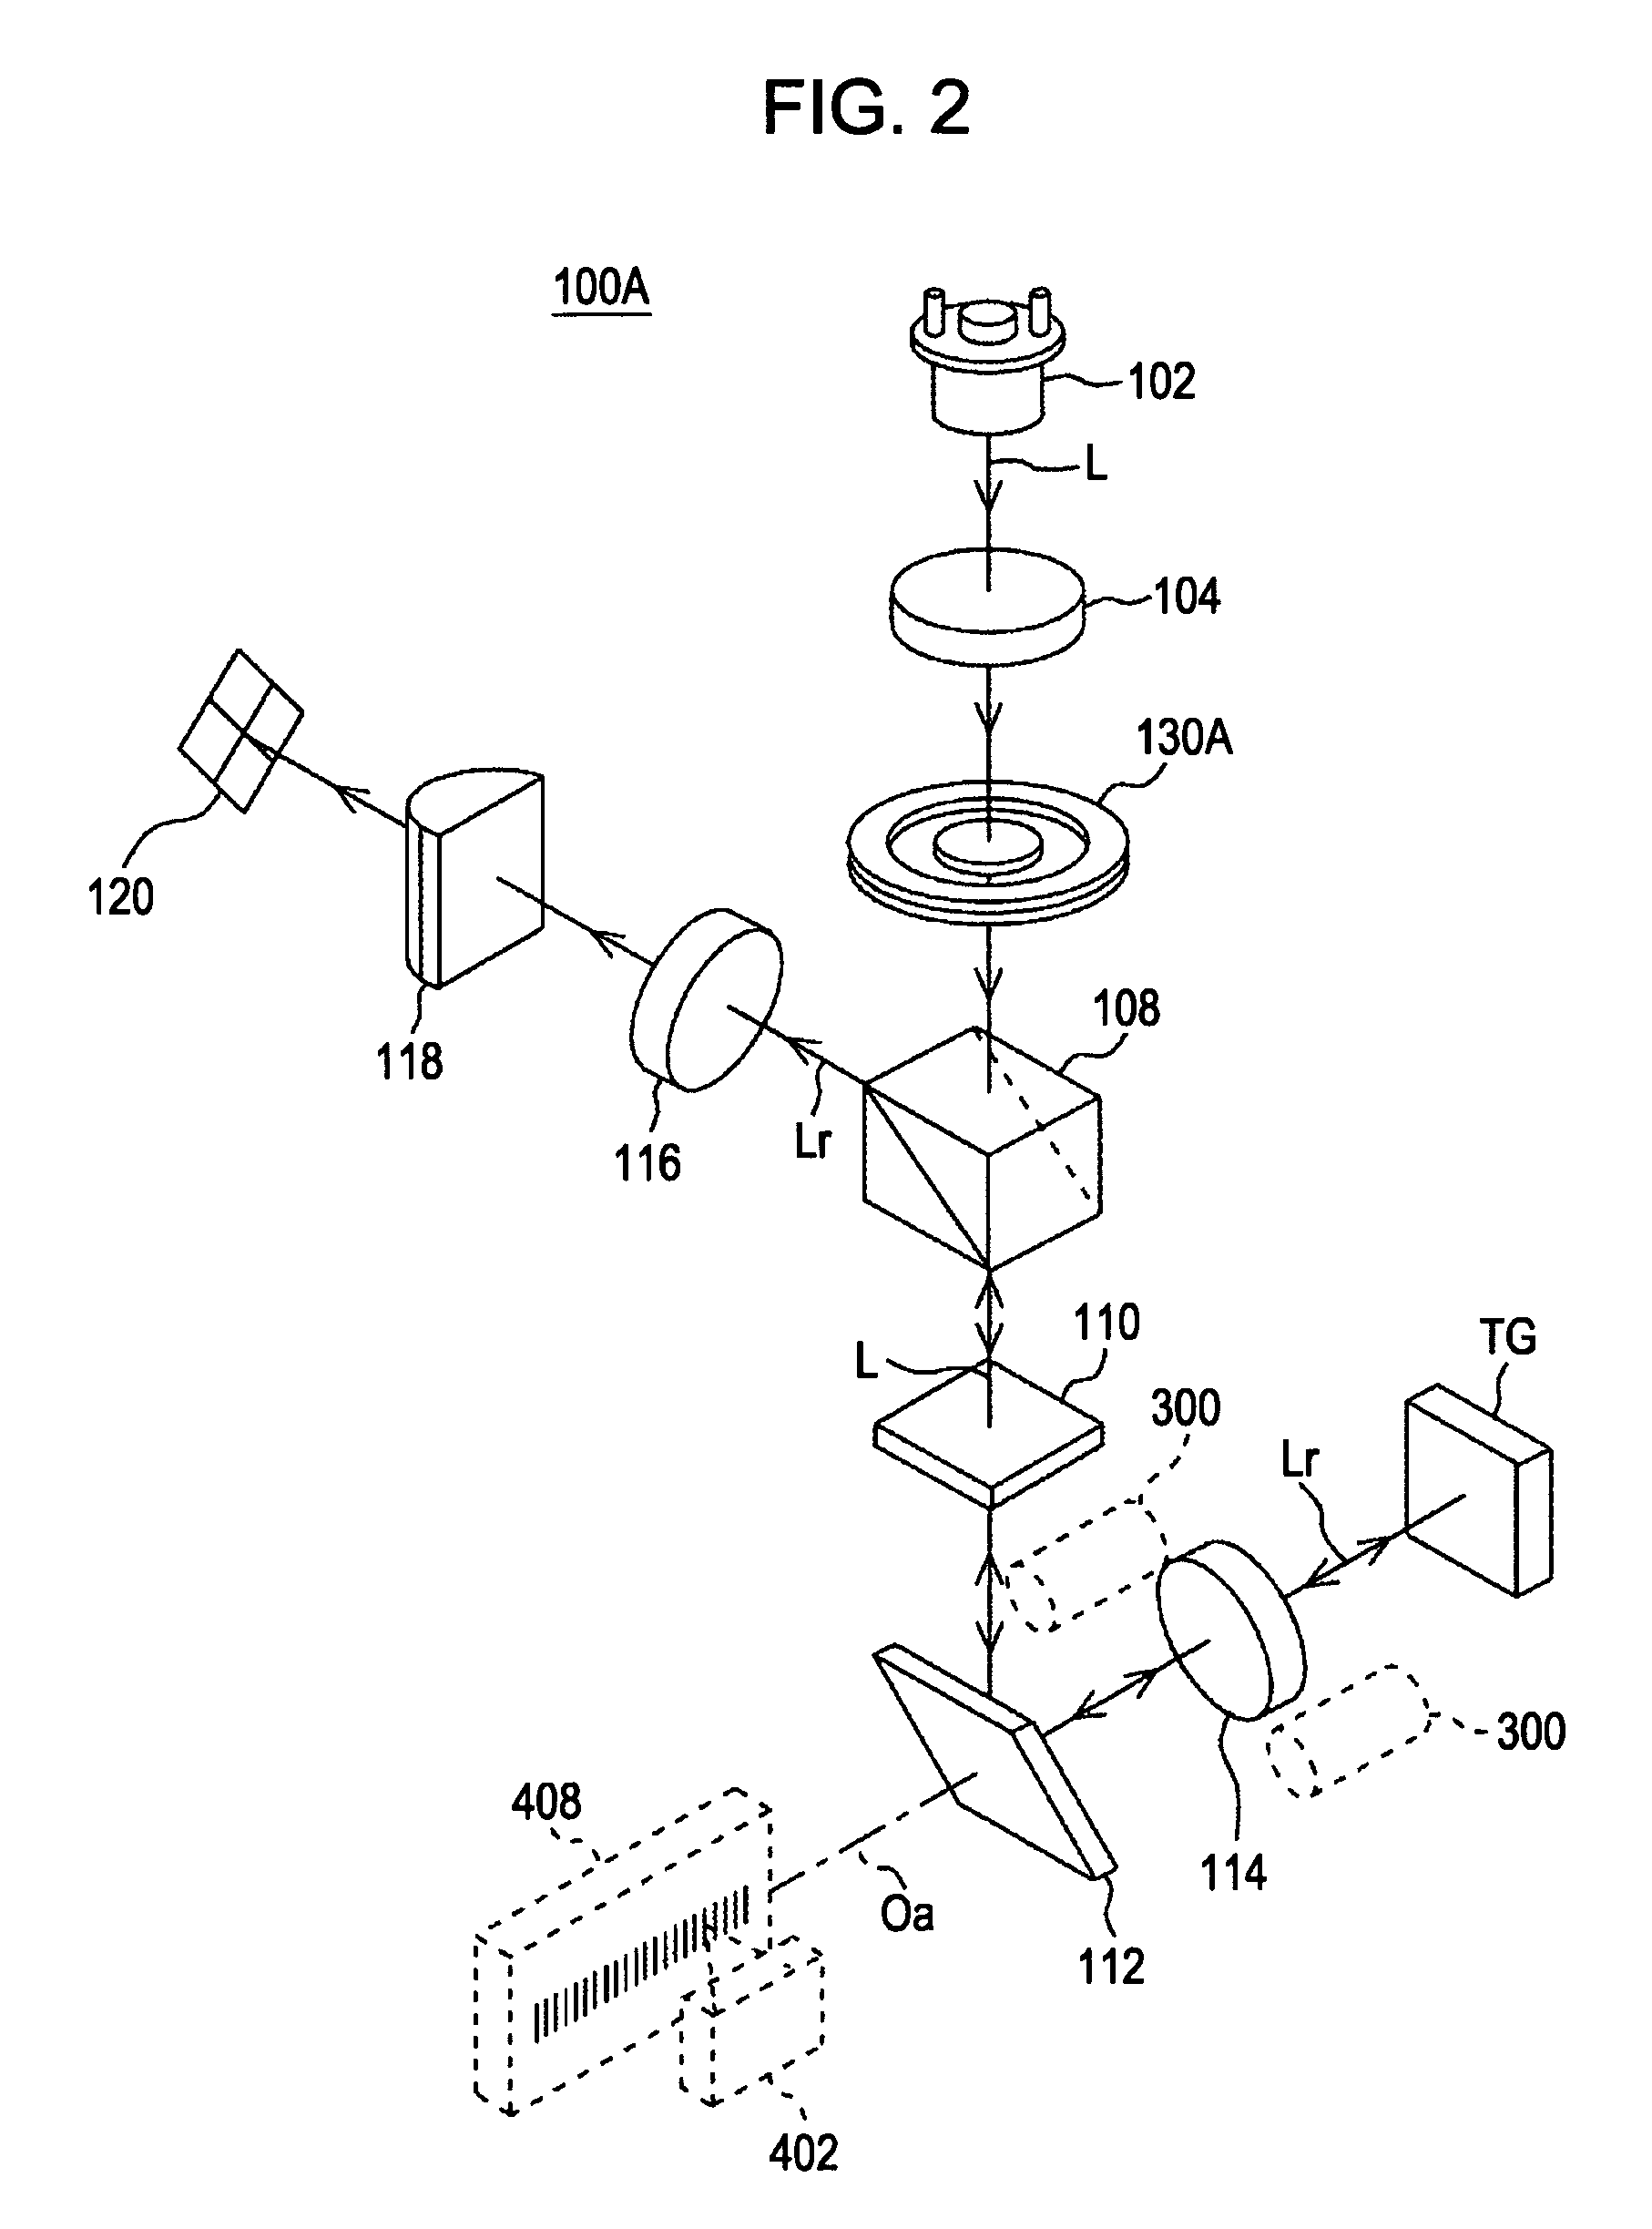 Non-contact displacement detecting device using optical astigmatism